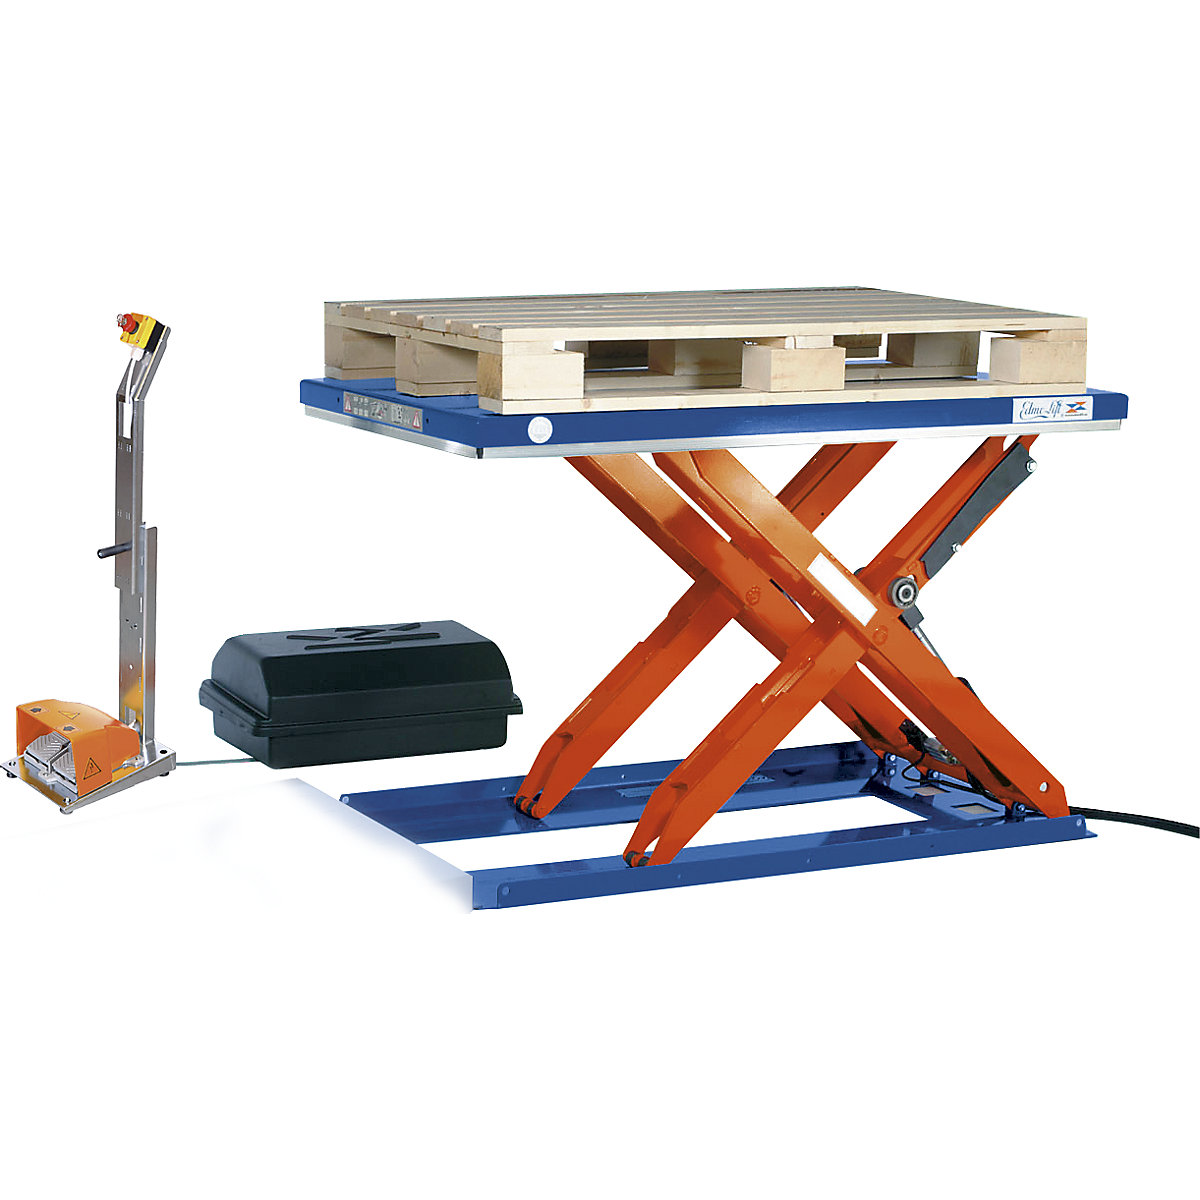 Low profile lift table – Edmolift, LxW 1500 x 1000 mm, lifting range up to 800 mm, closed platform, 400 V, with foot operated control unit